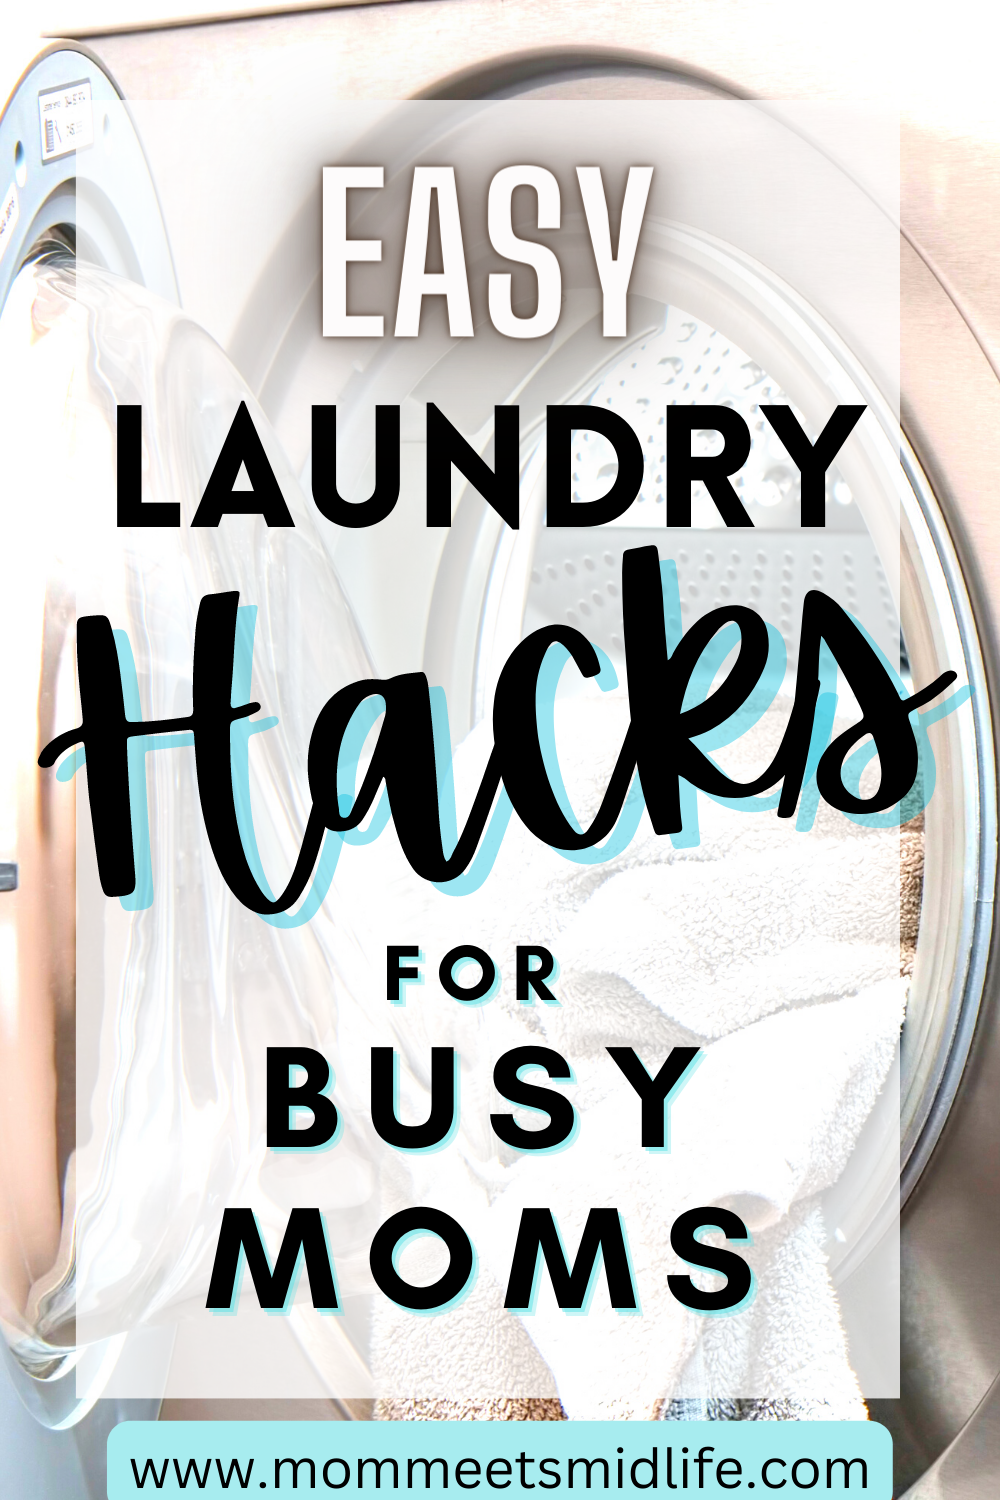 Easy Laundry Hacks That Work For Busy Moms Mom Meets Midlife